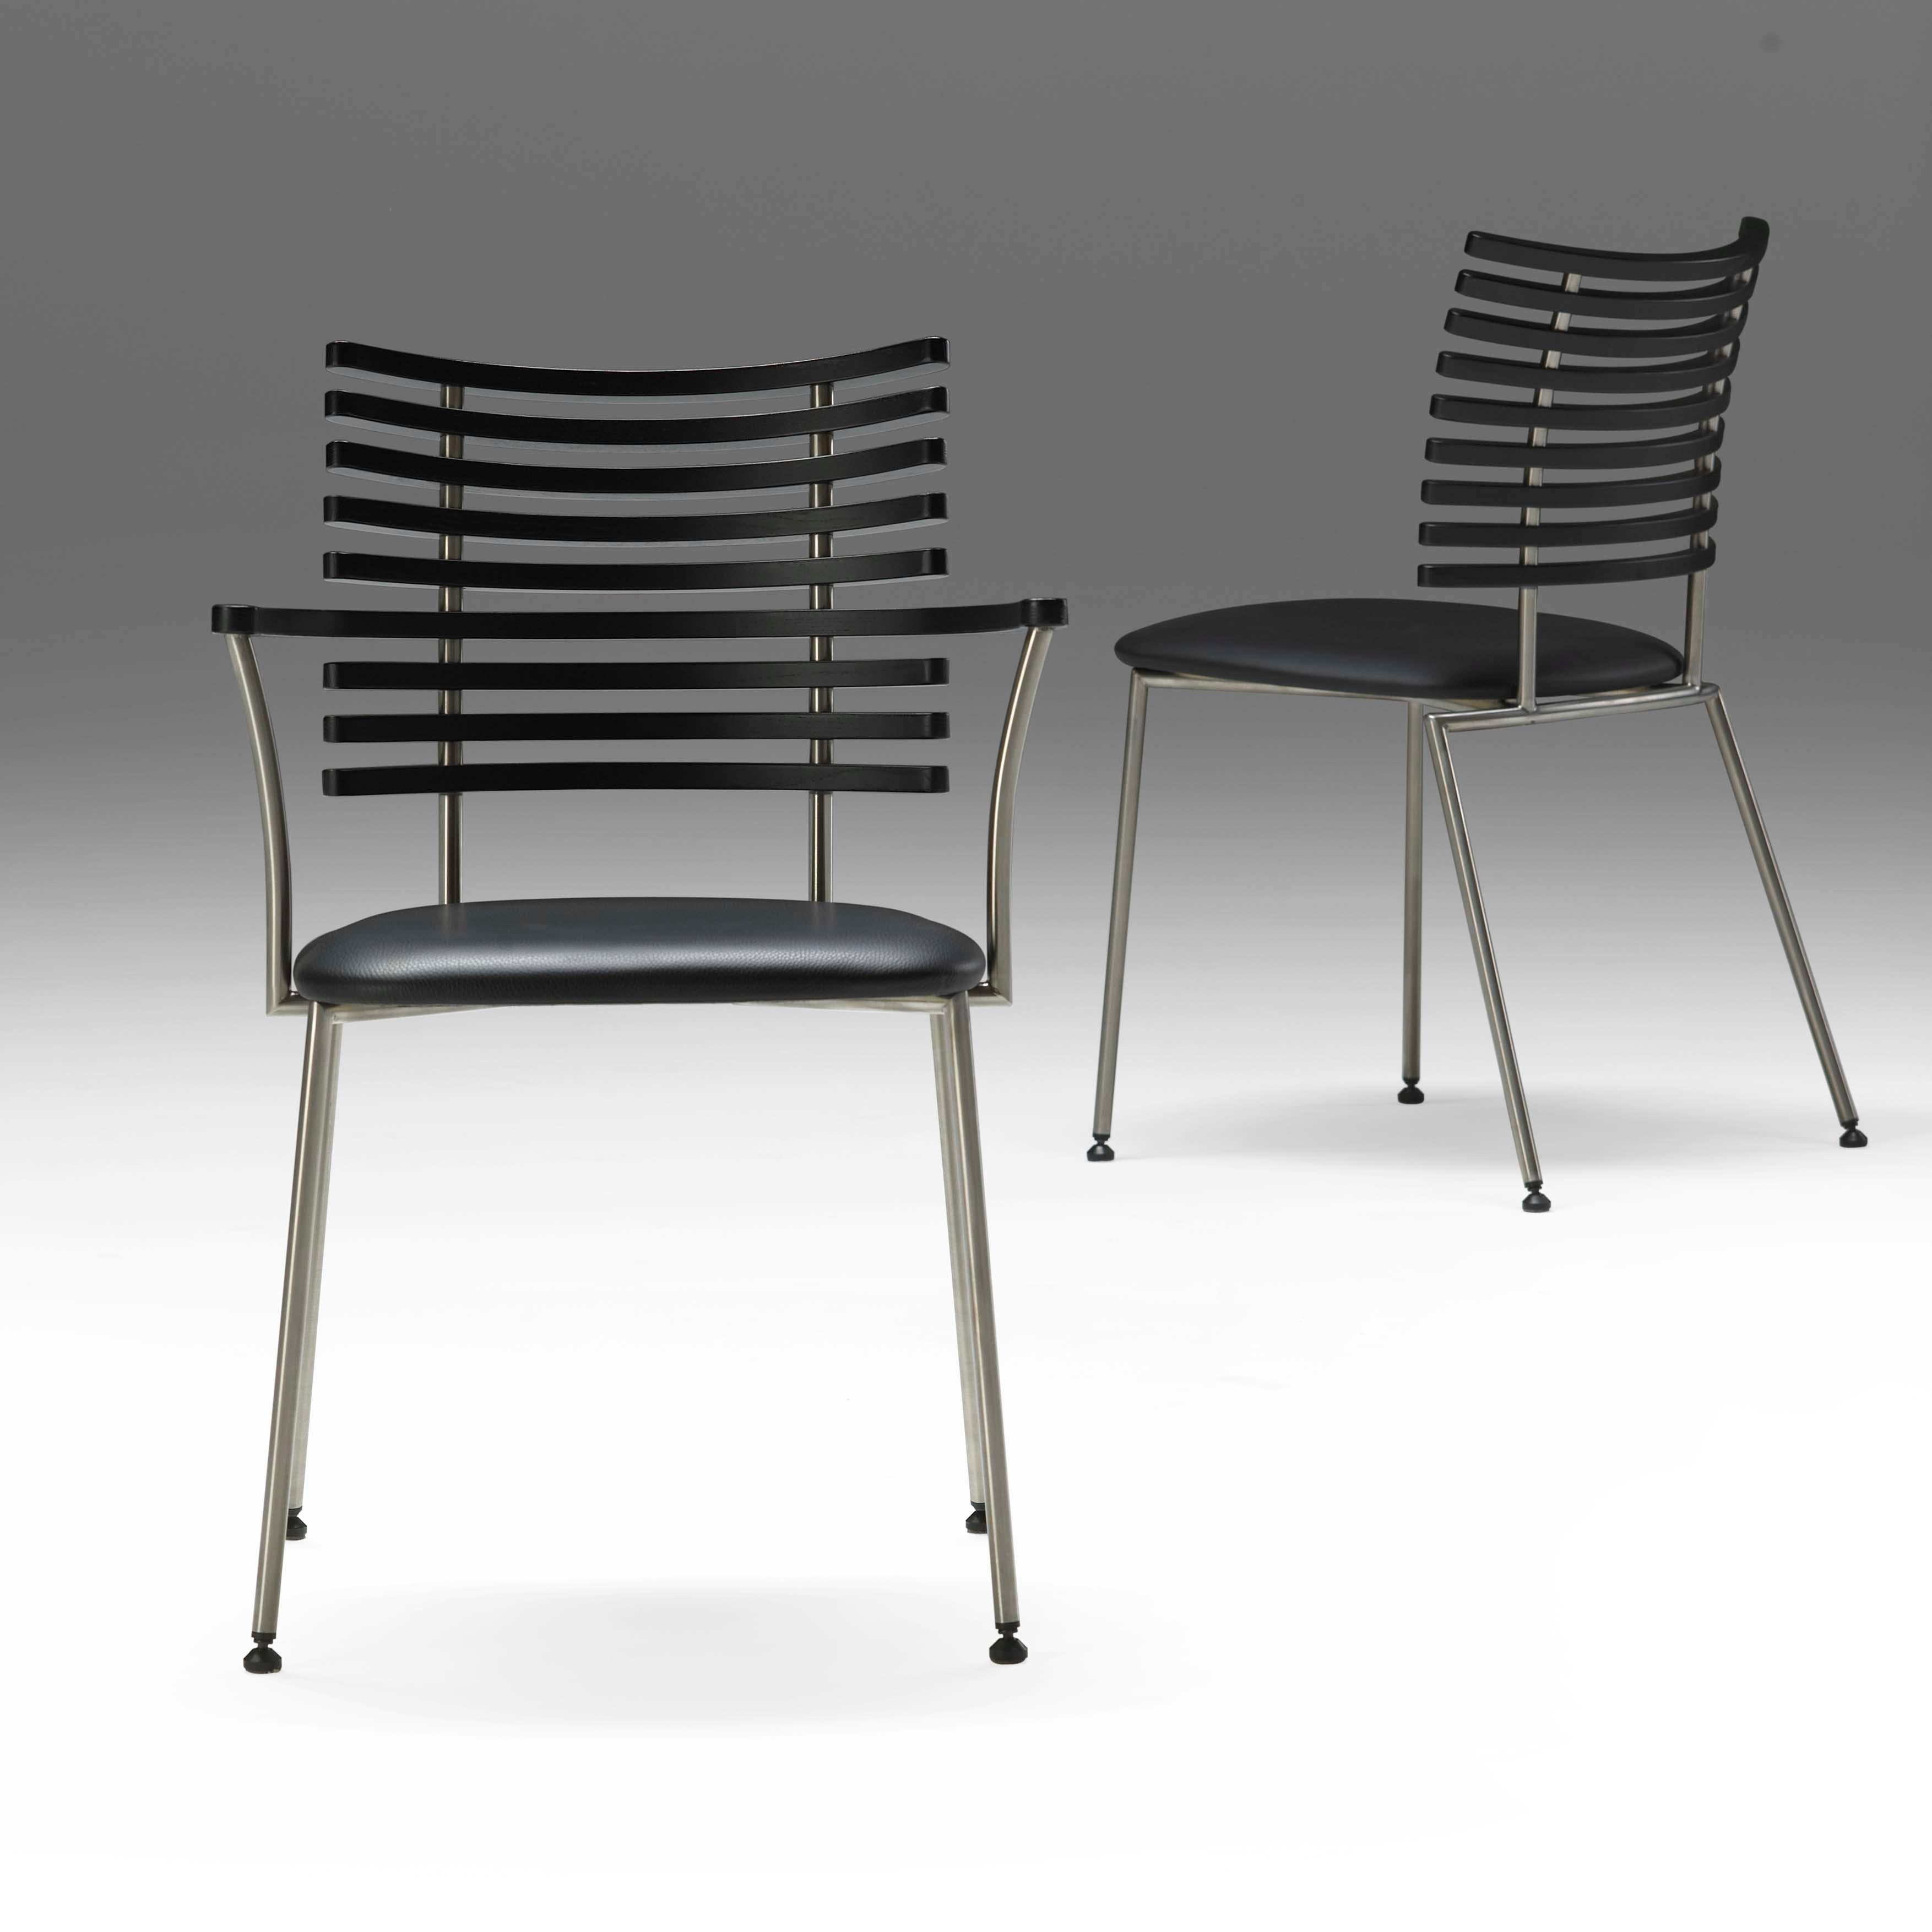 SET OF 1 x Table and 6 x chairs - Design by Nissen & Gehl MDD and Henrik Lehm In New Condition For Sale In Juelsminde, DK